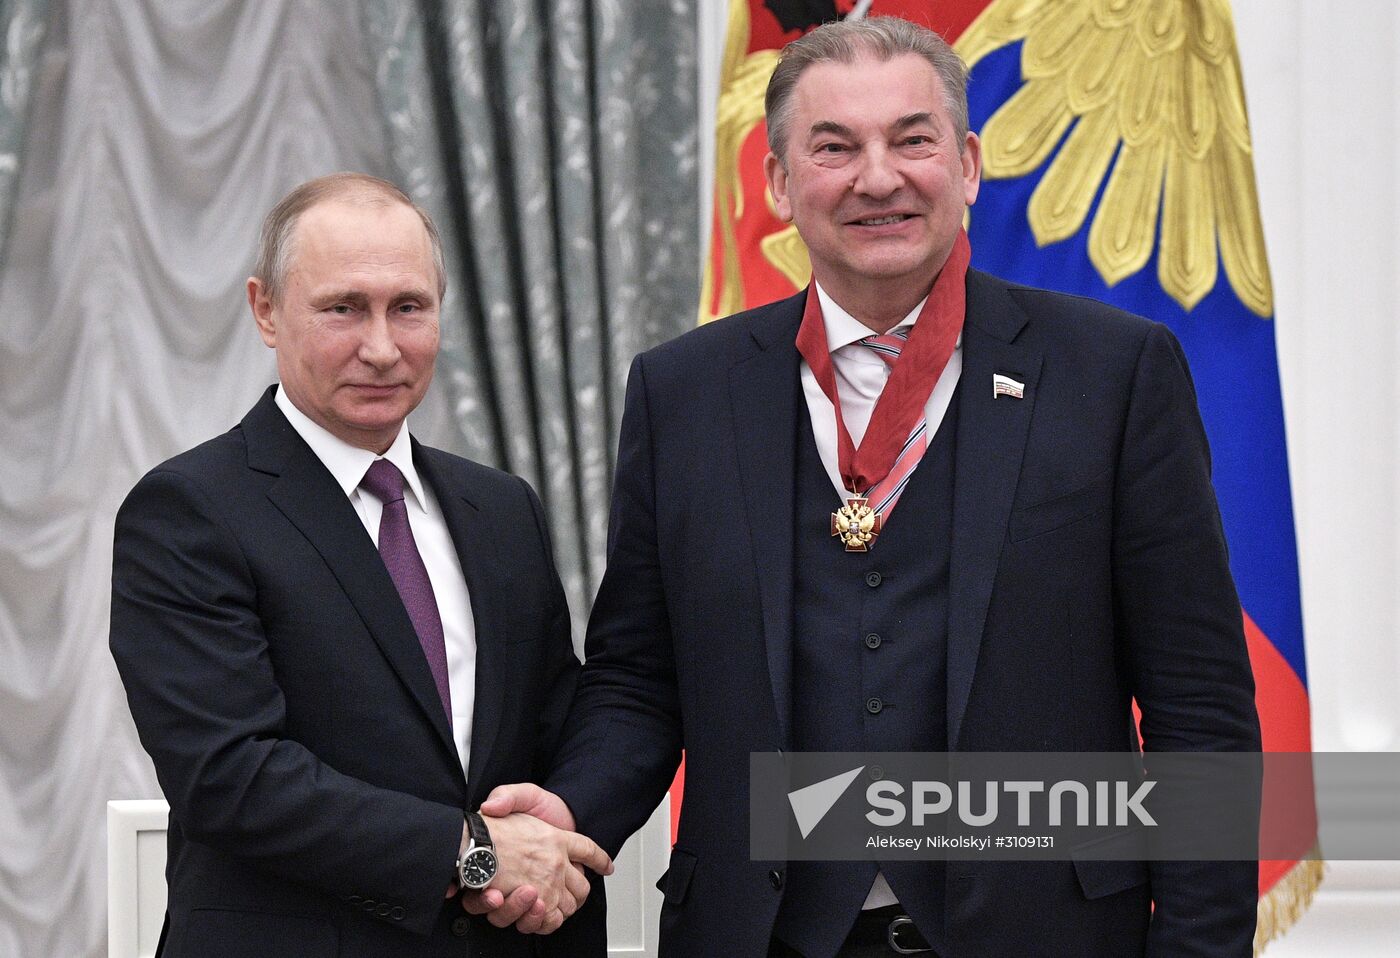 Ceremony to present state awards by Russian President Vladimir Putin in the Kremlin